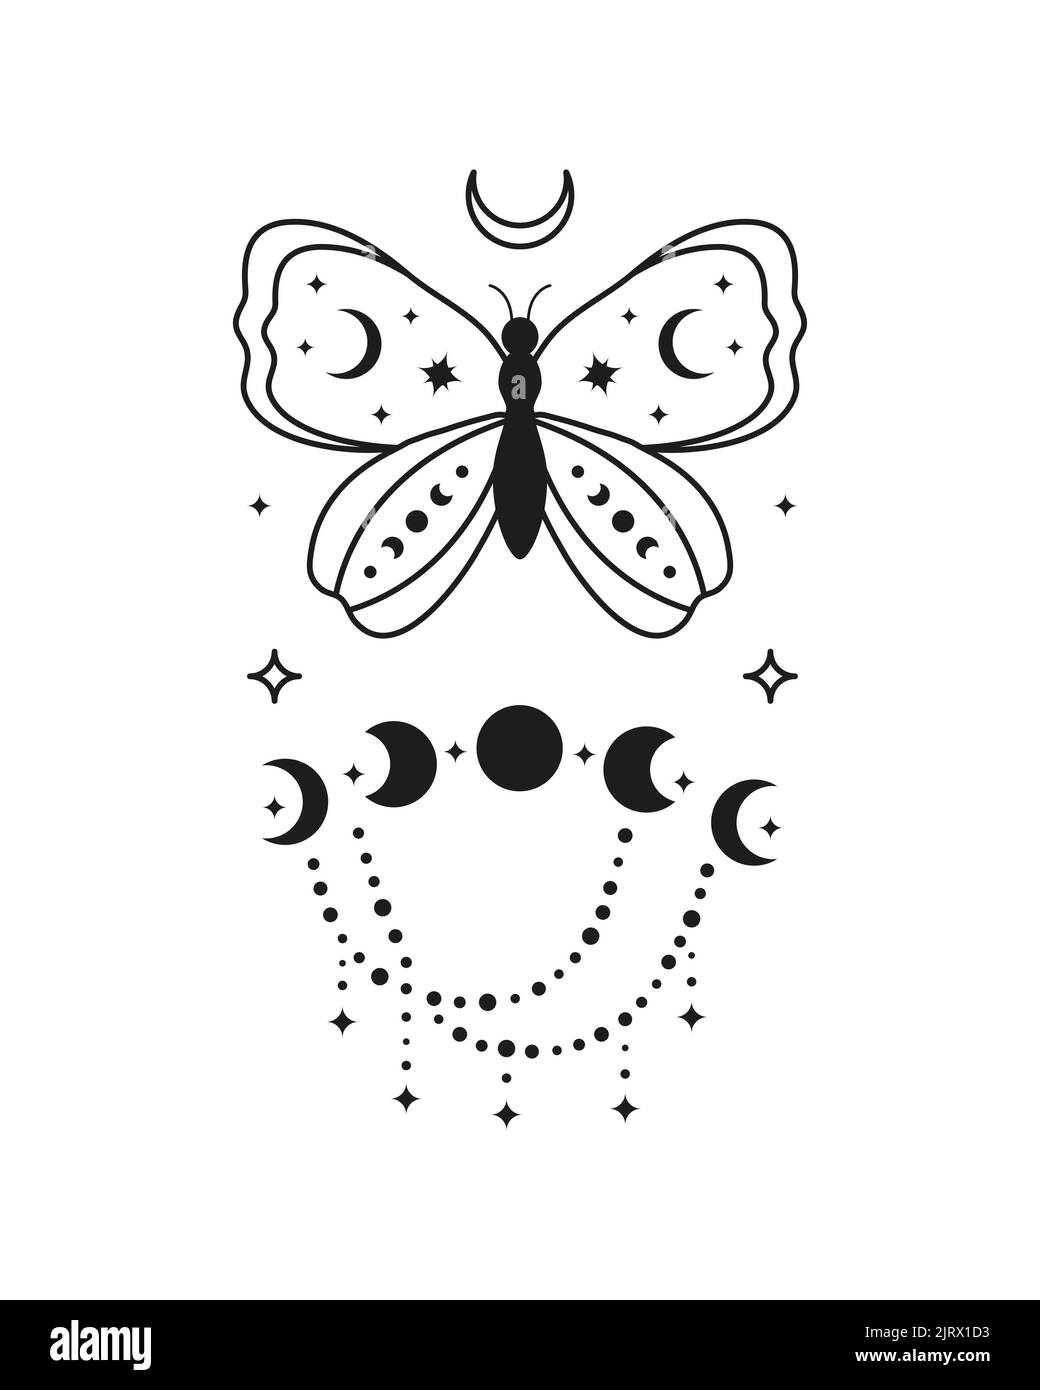 Magic occult tarot card with boho symbols butterfly, moon phases, beads ...